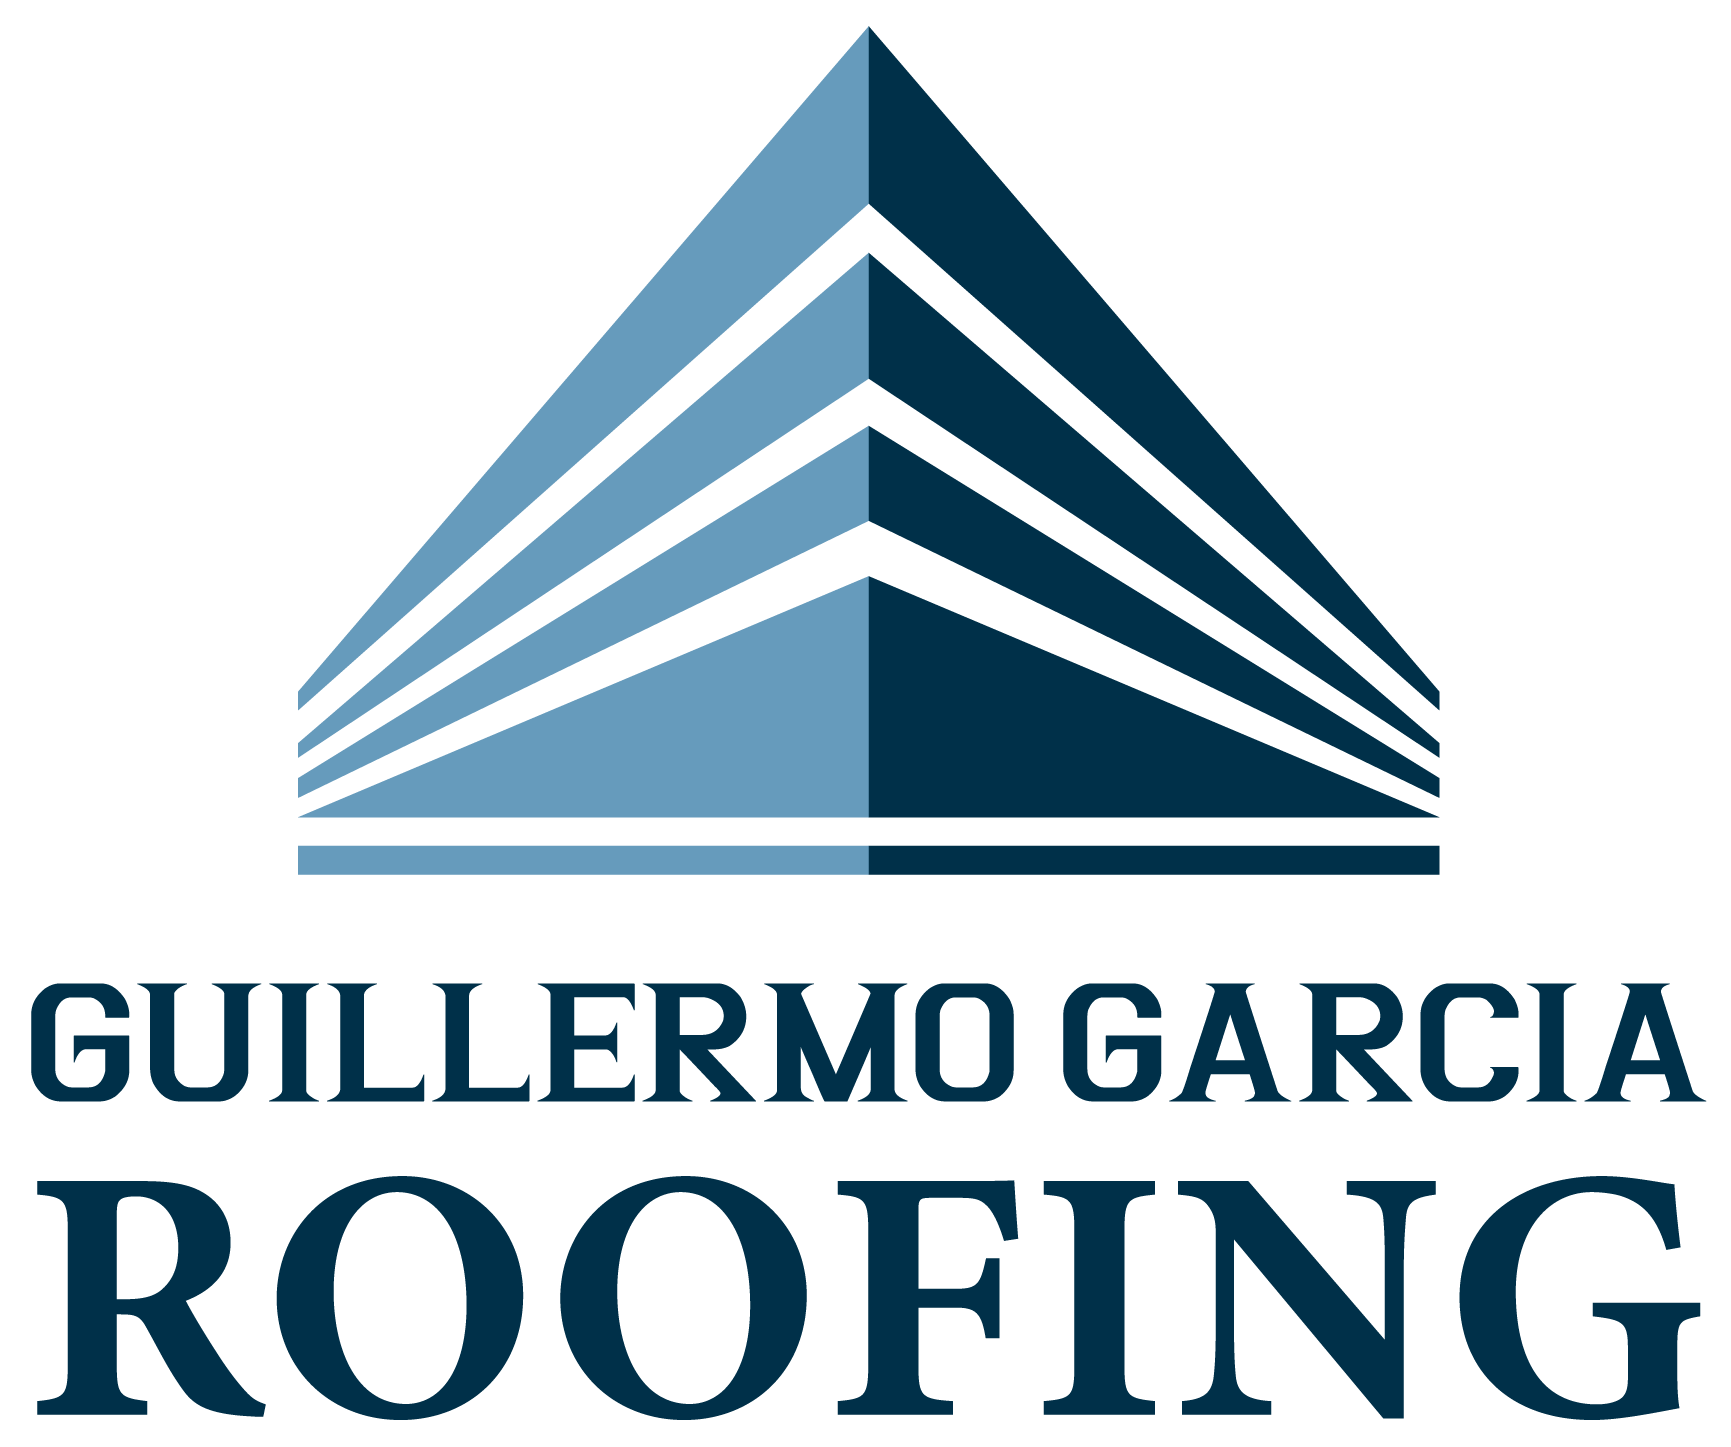 Guillermo Garcia Roofing